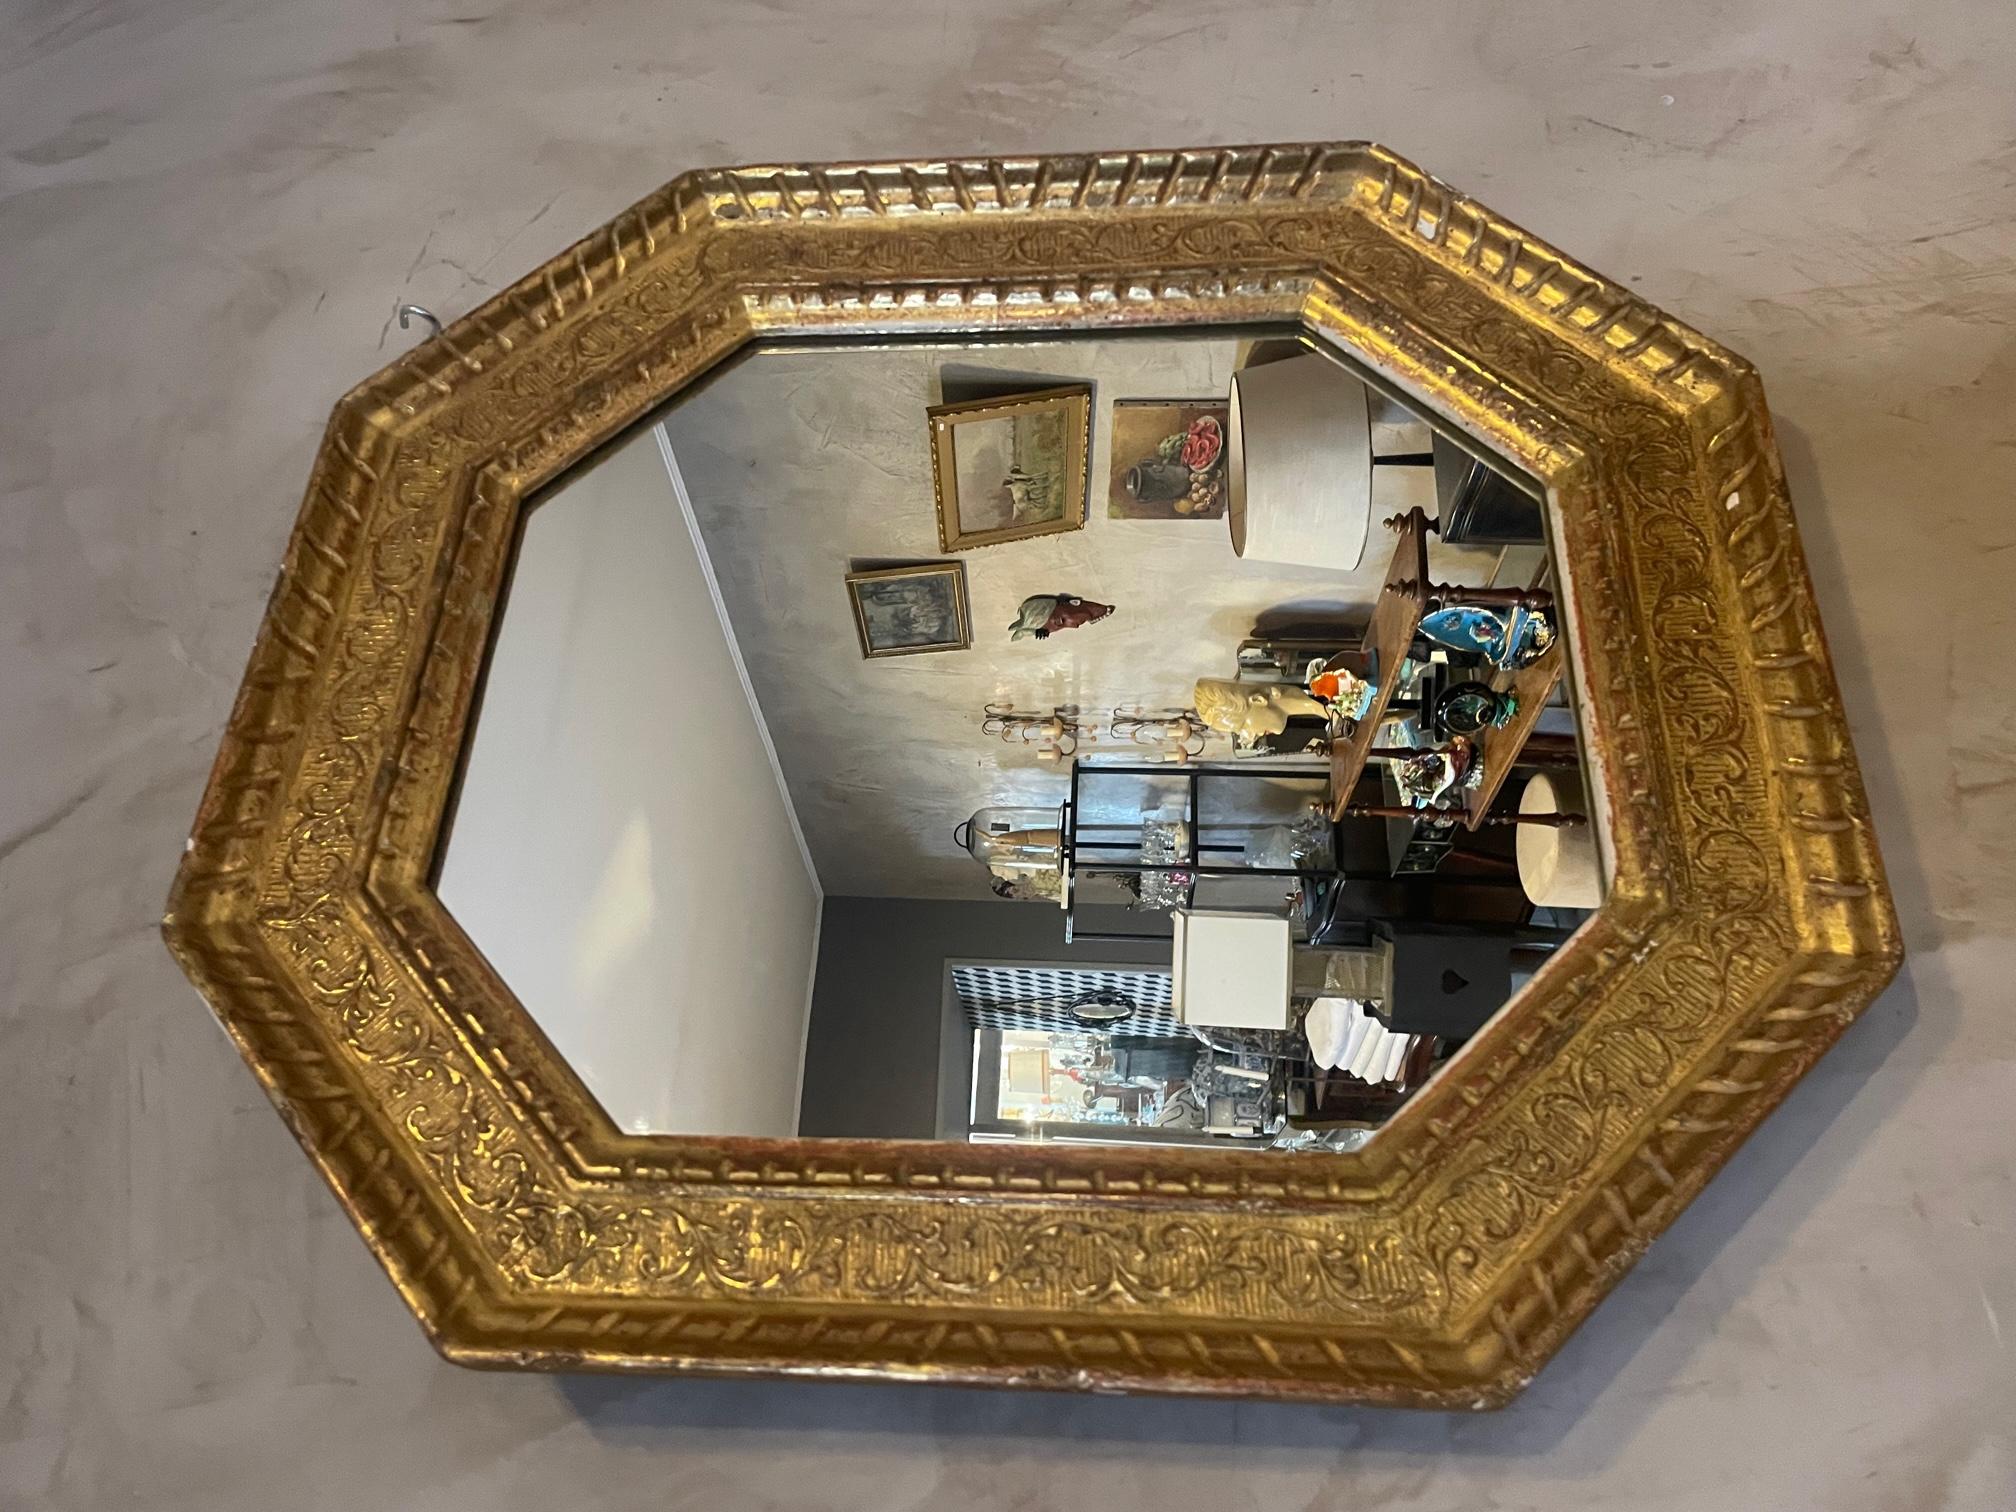 Very nice old octagonal mirror in good condition in golden wood. 
Original gilding. Very nice quality. 